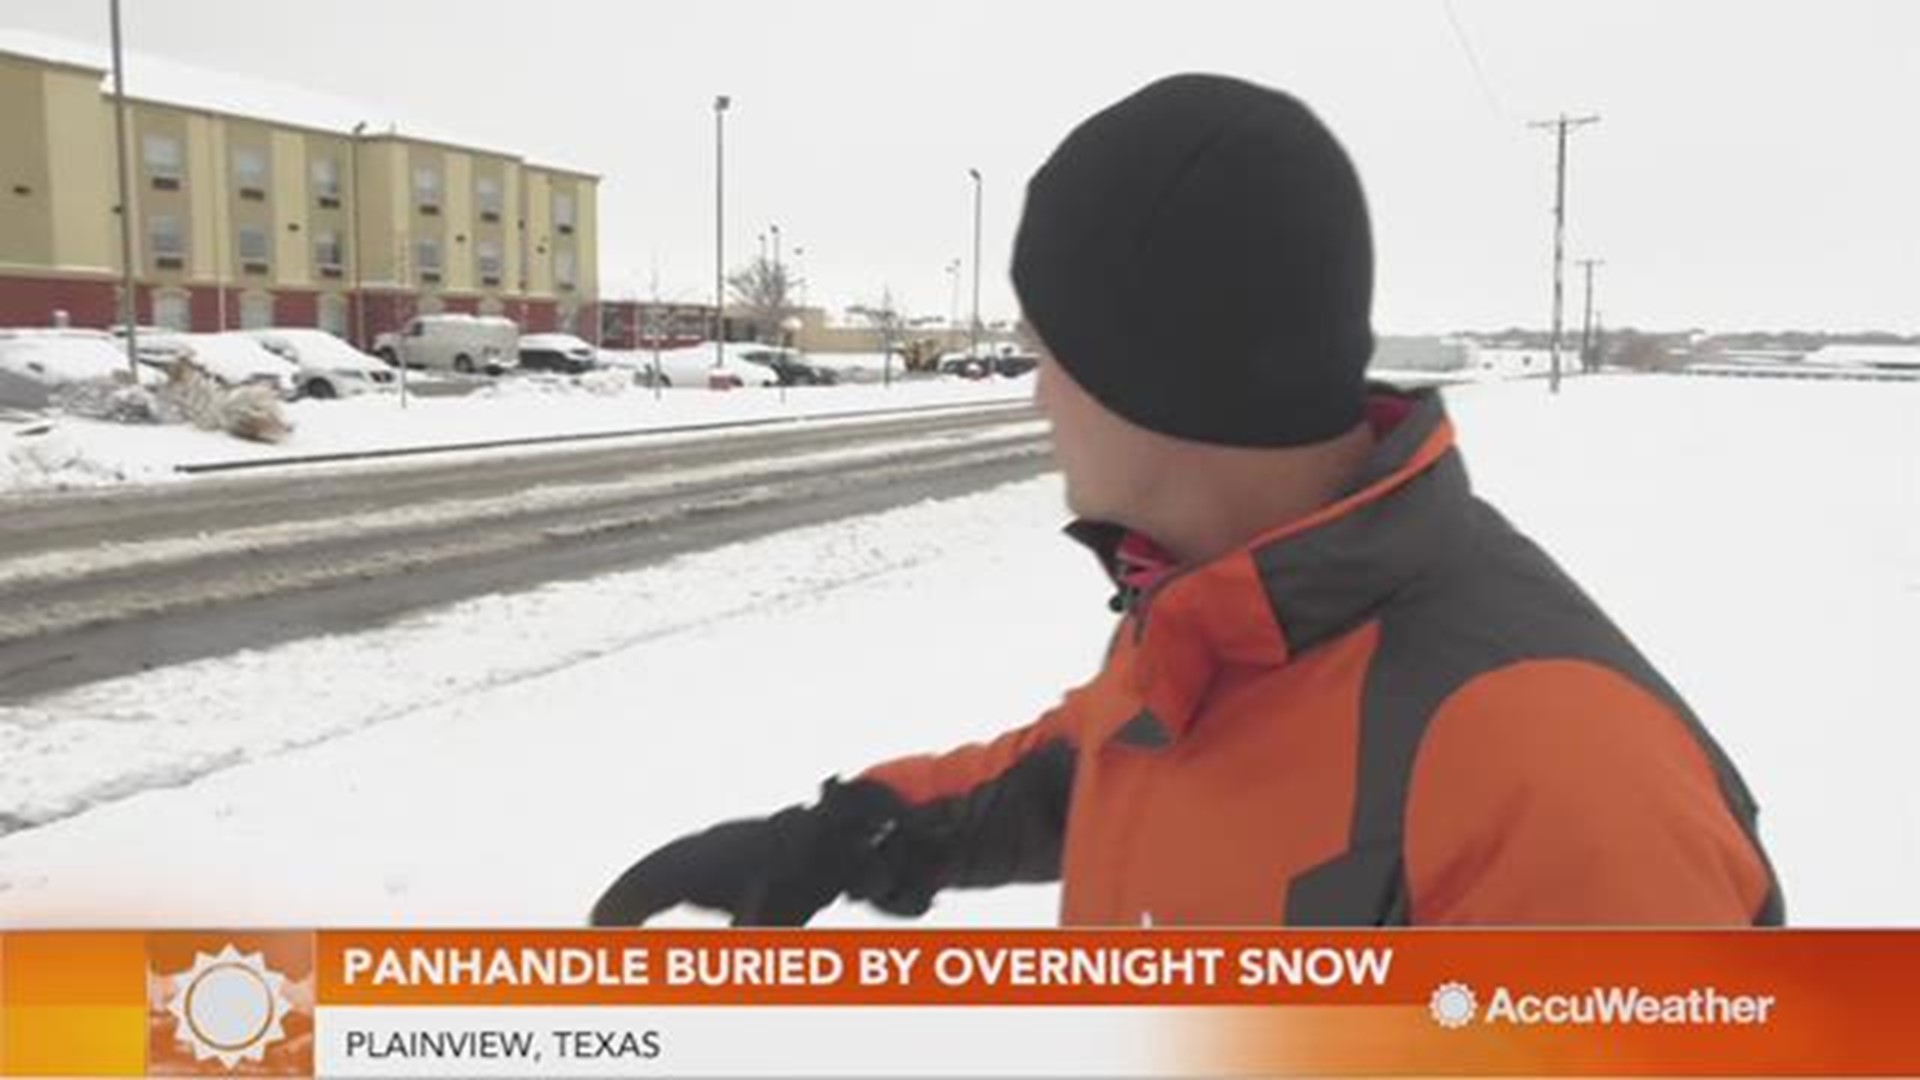 AccuWeather reporter, Jonathan Petramala, was in Plainview, Texas where they were buried in snow from an overnight winter storm.